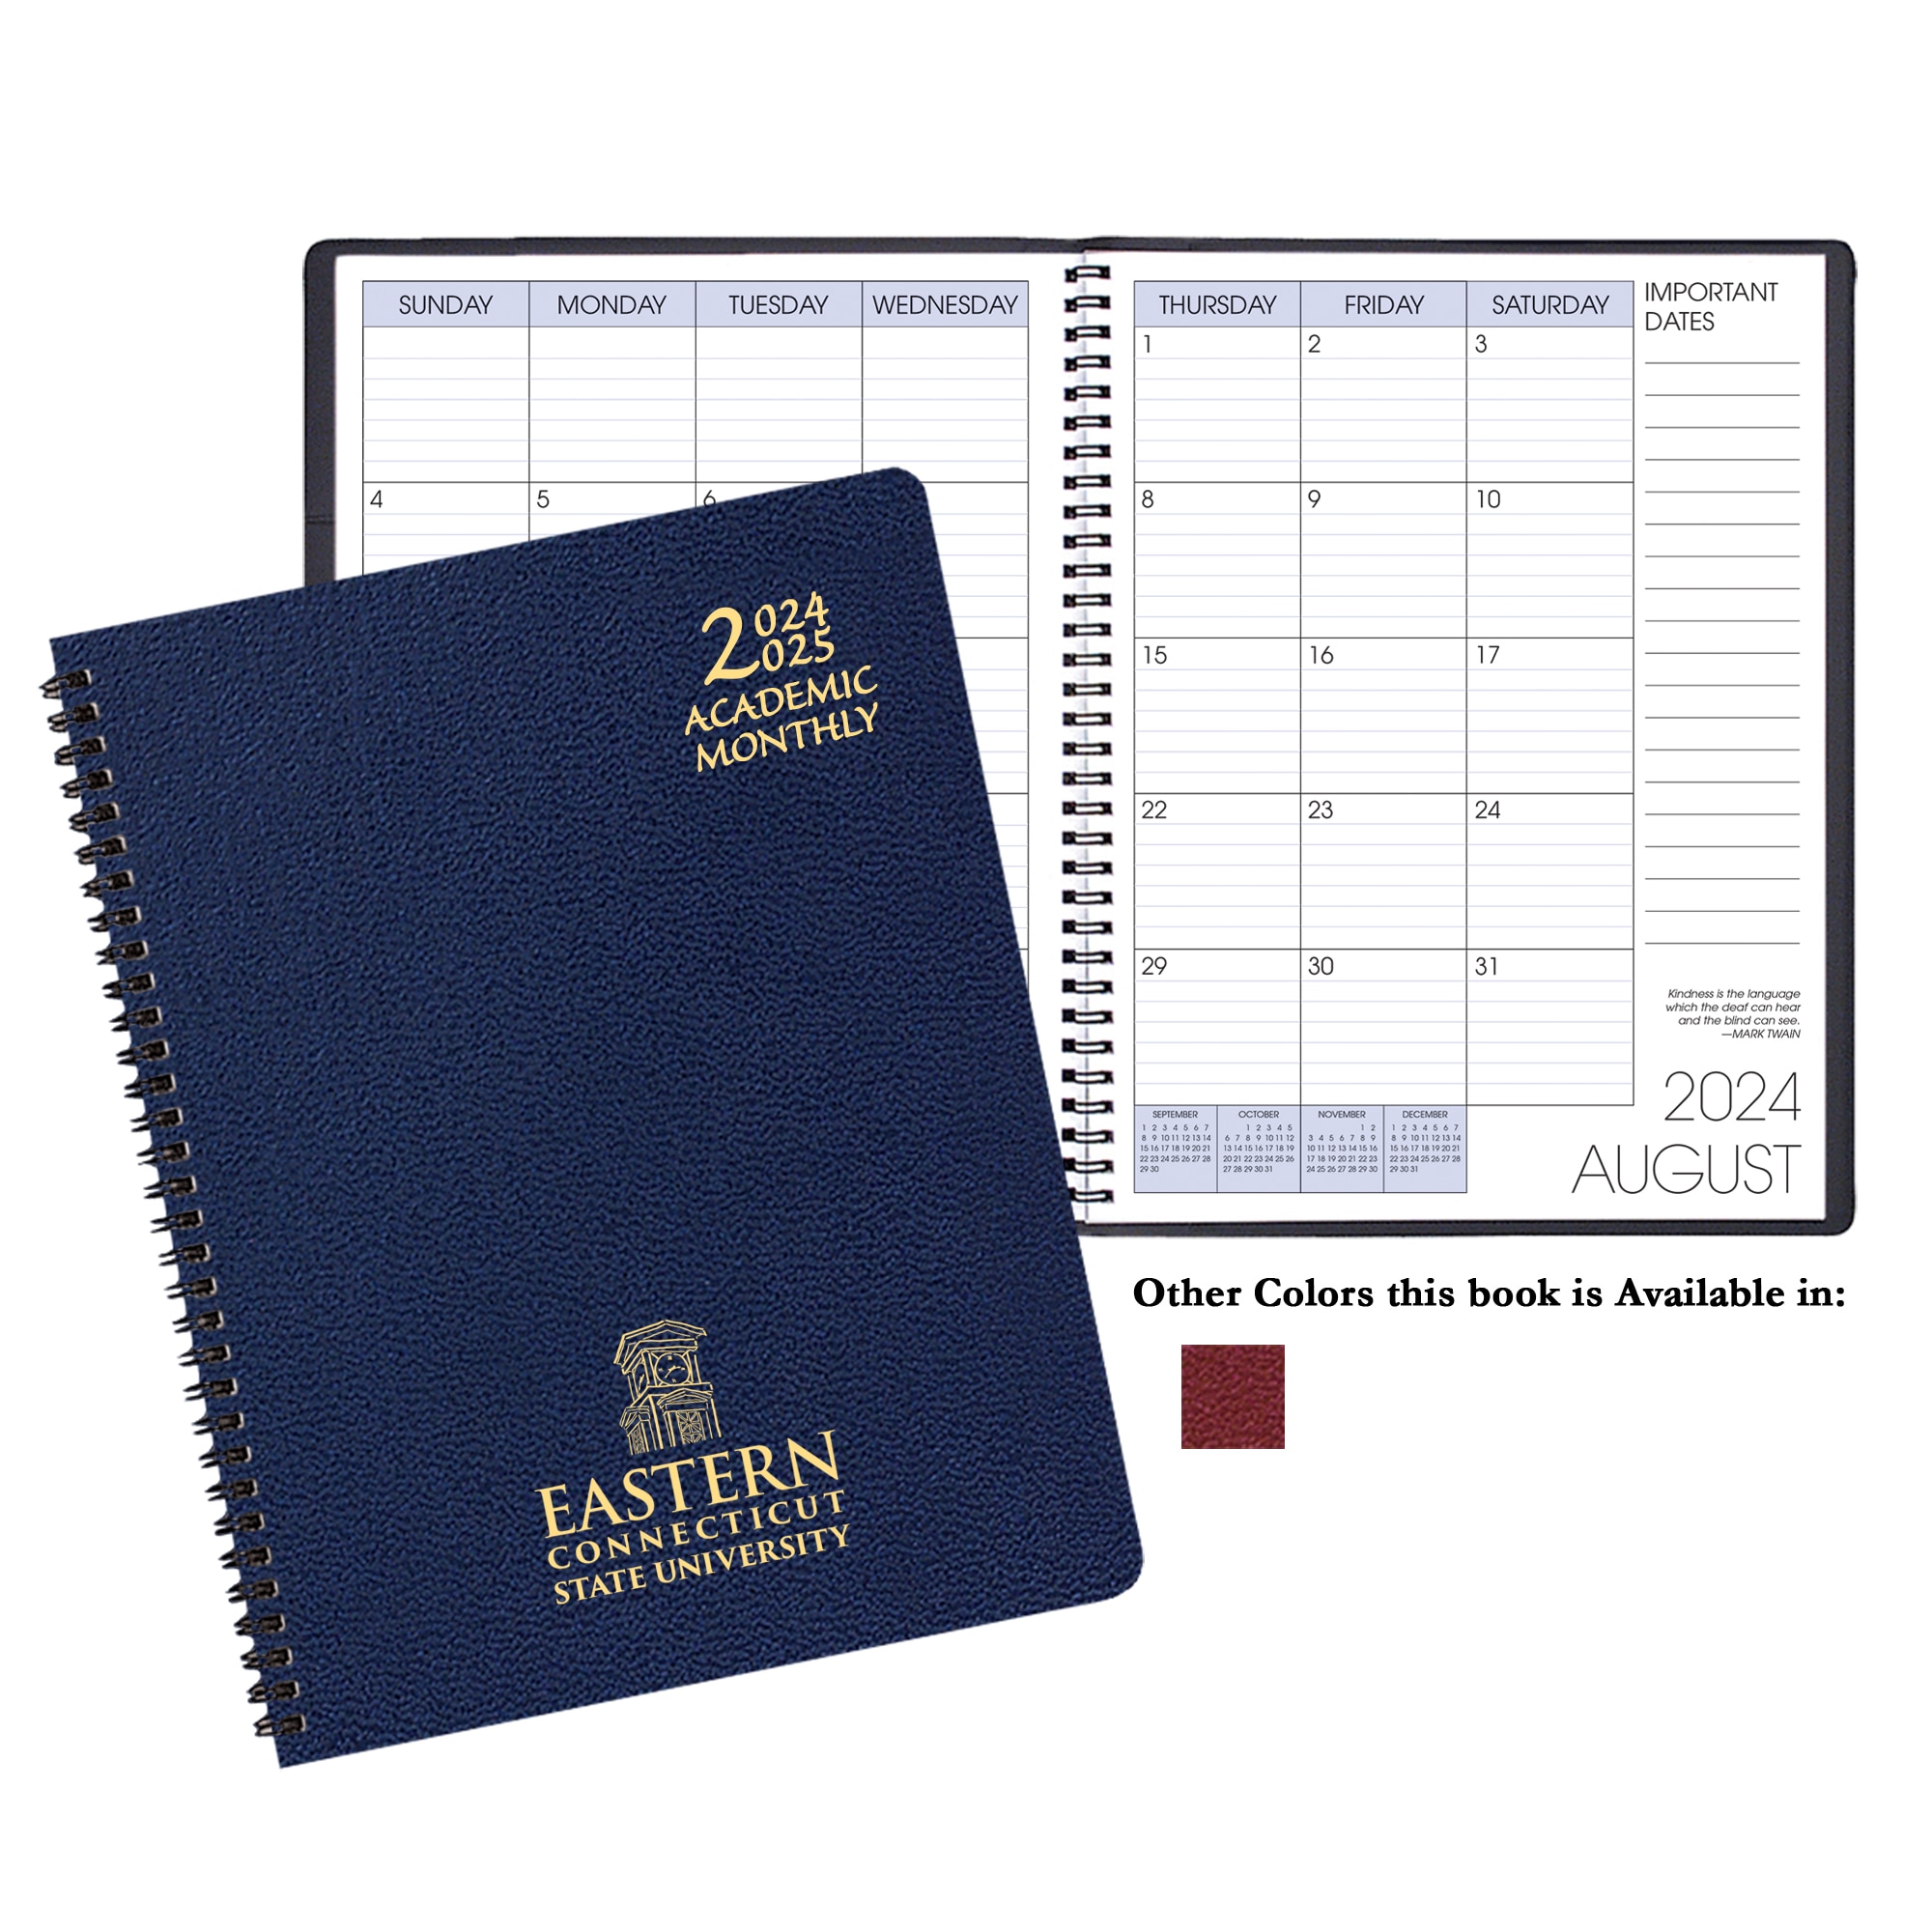 Payne 24-25 Imprinted Academic Monthly Planner  8.5"x11"